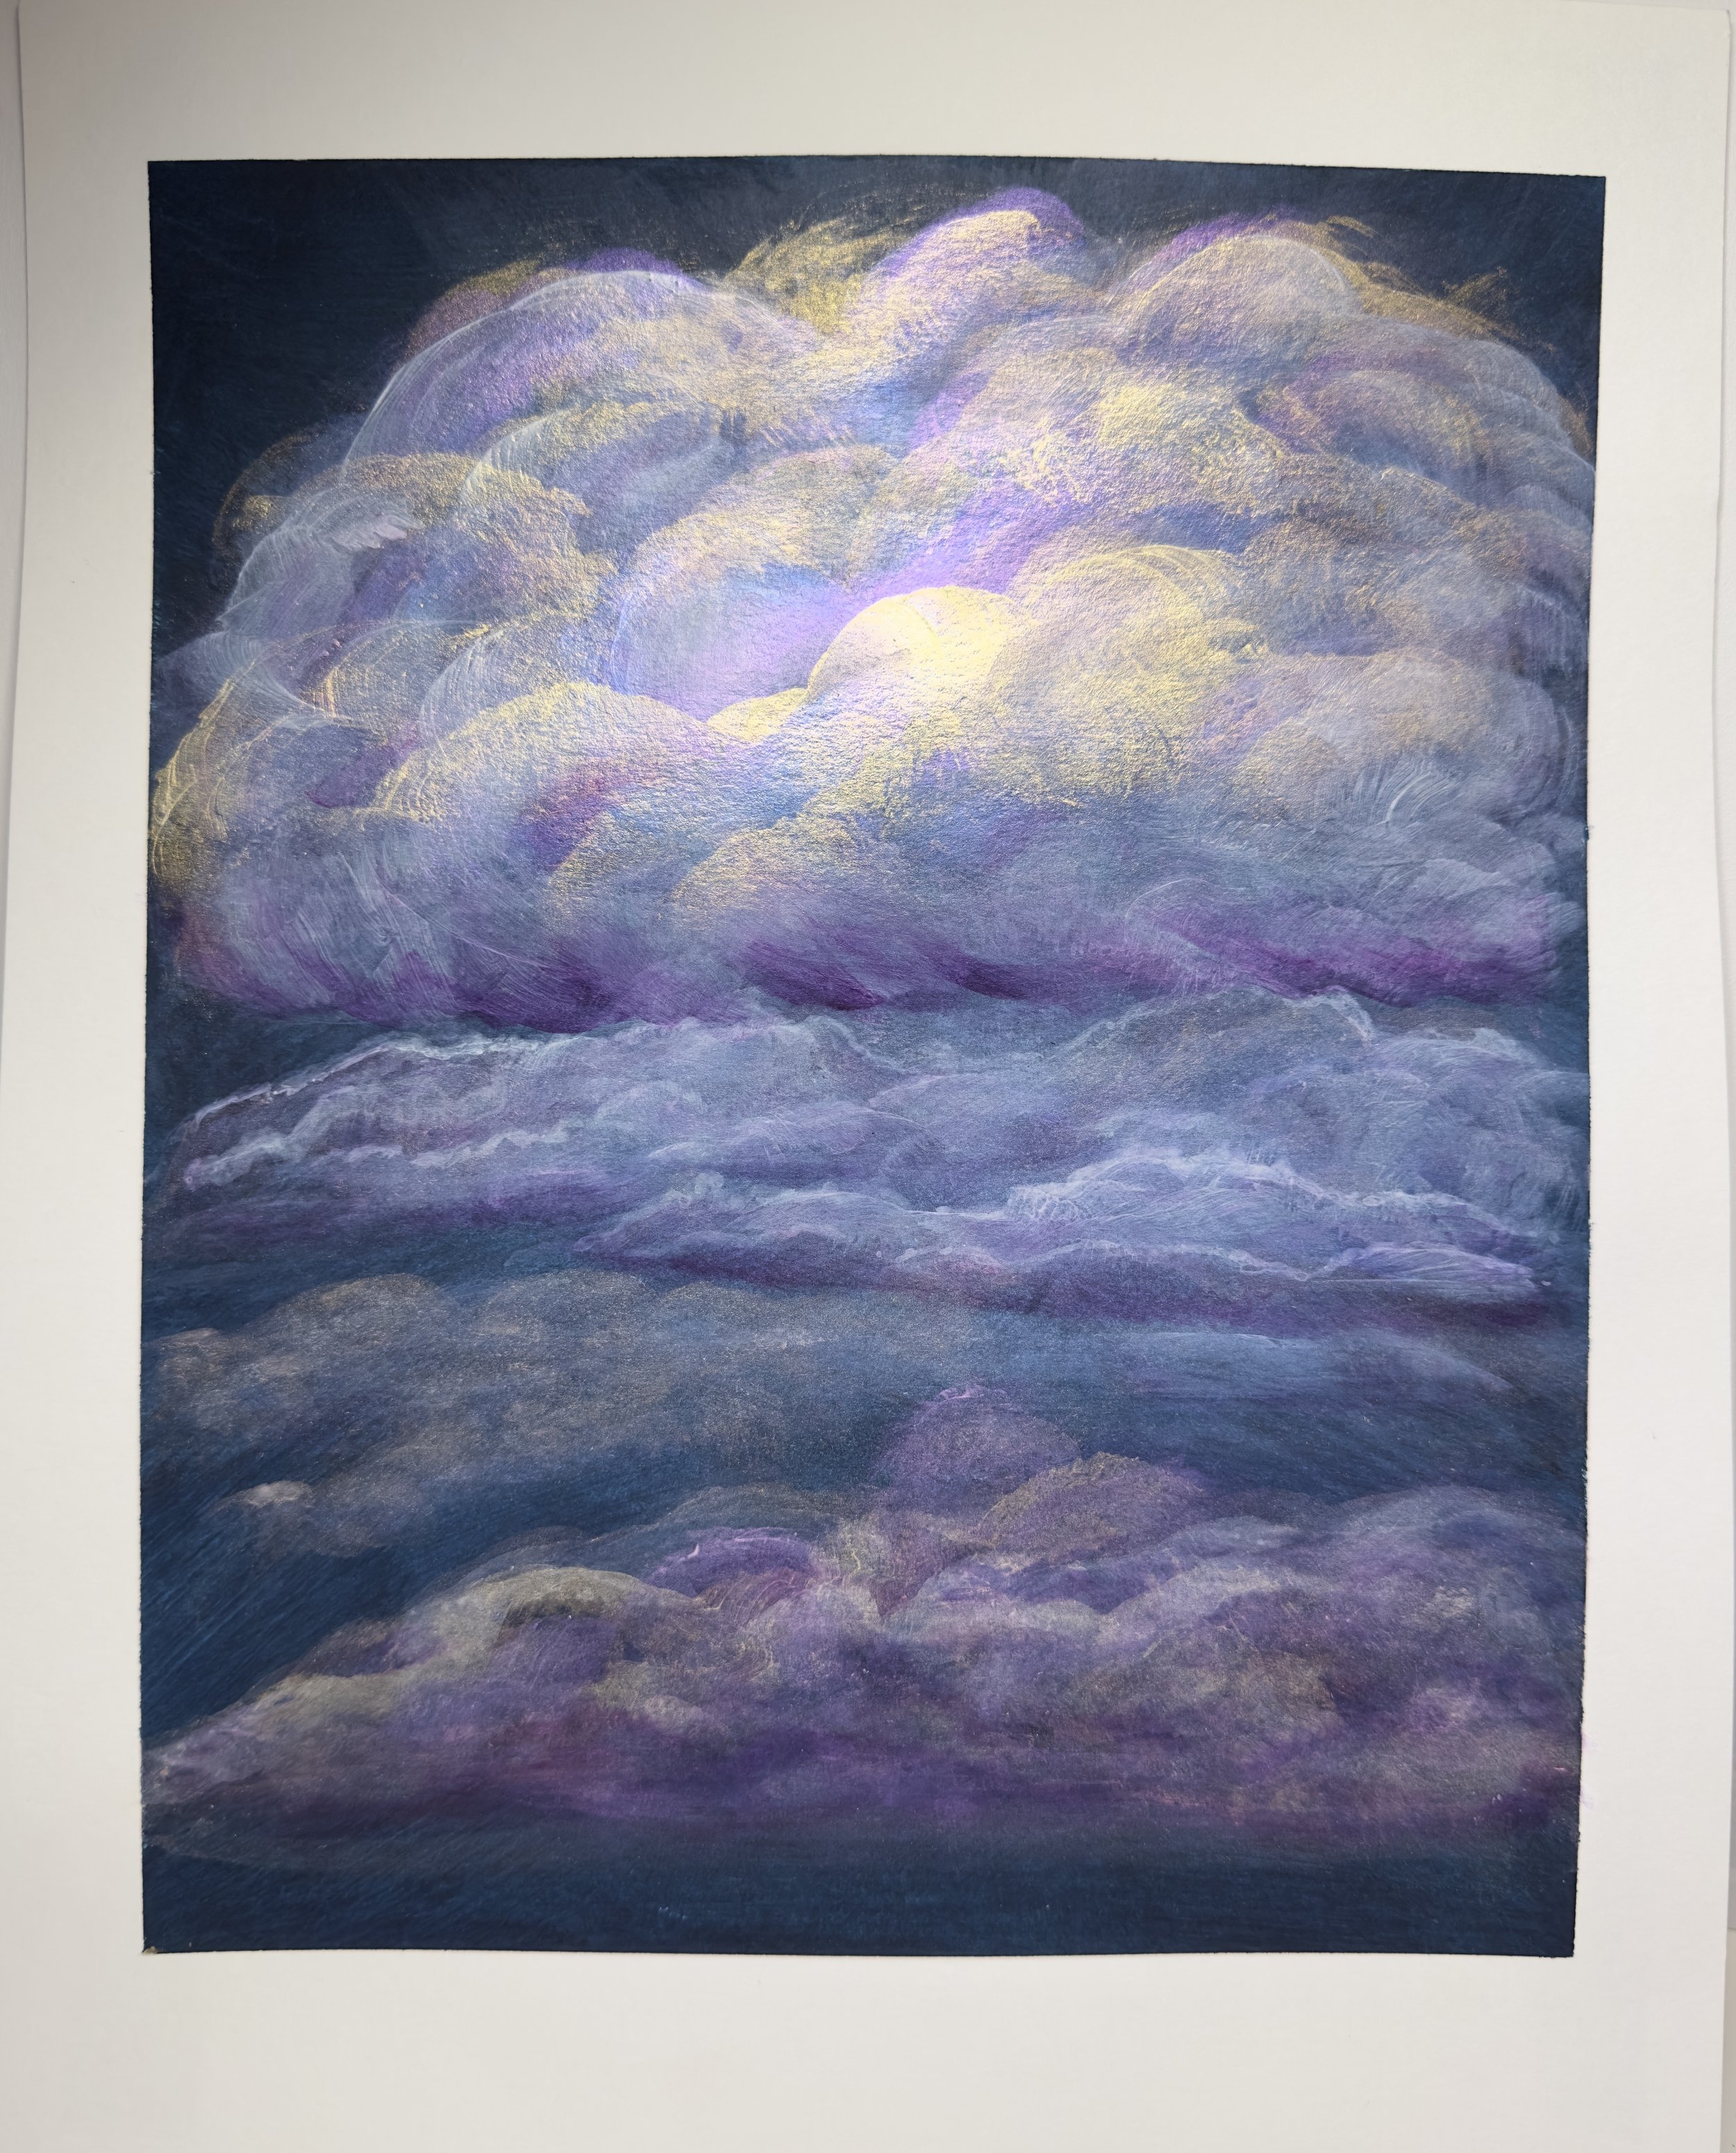 The original cloud painting with acrylic and Interference paint on watercolor paper.